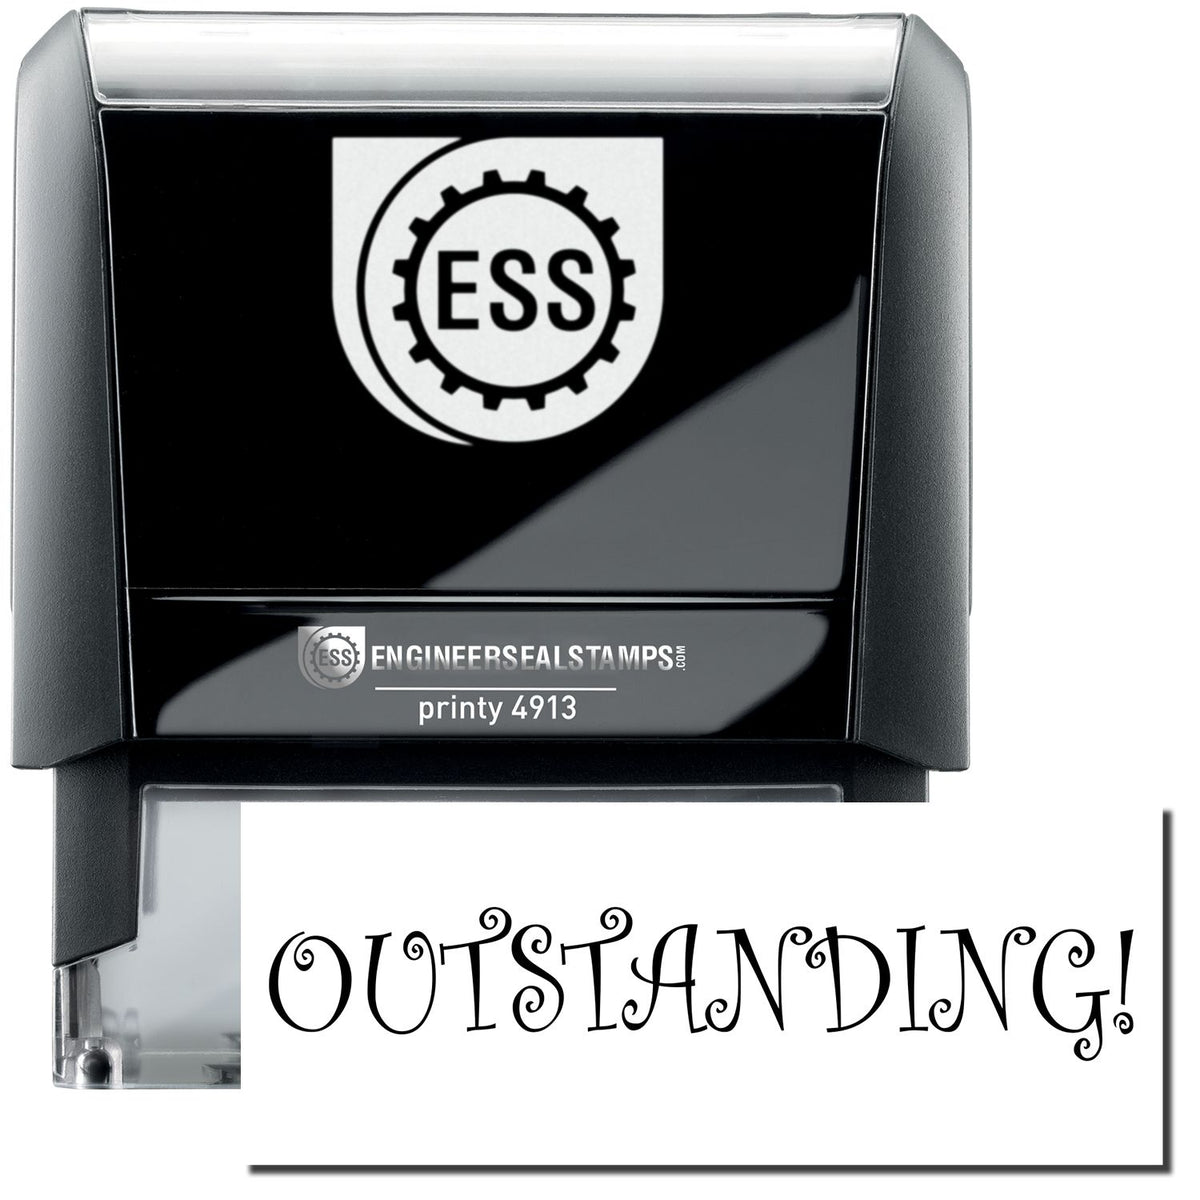 A self-inking stamp with a stamped image showing how the text &quot;OUTSTANDING!&quot; in a large unique font is displayed by it after stamping.